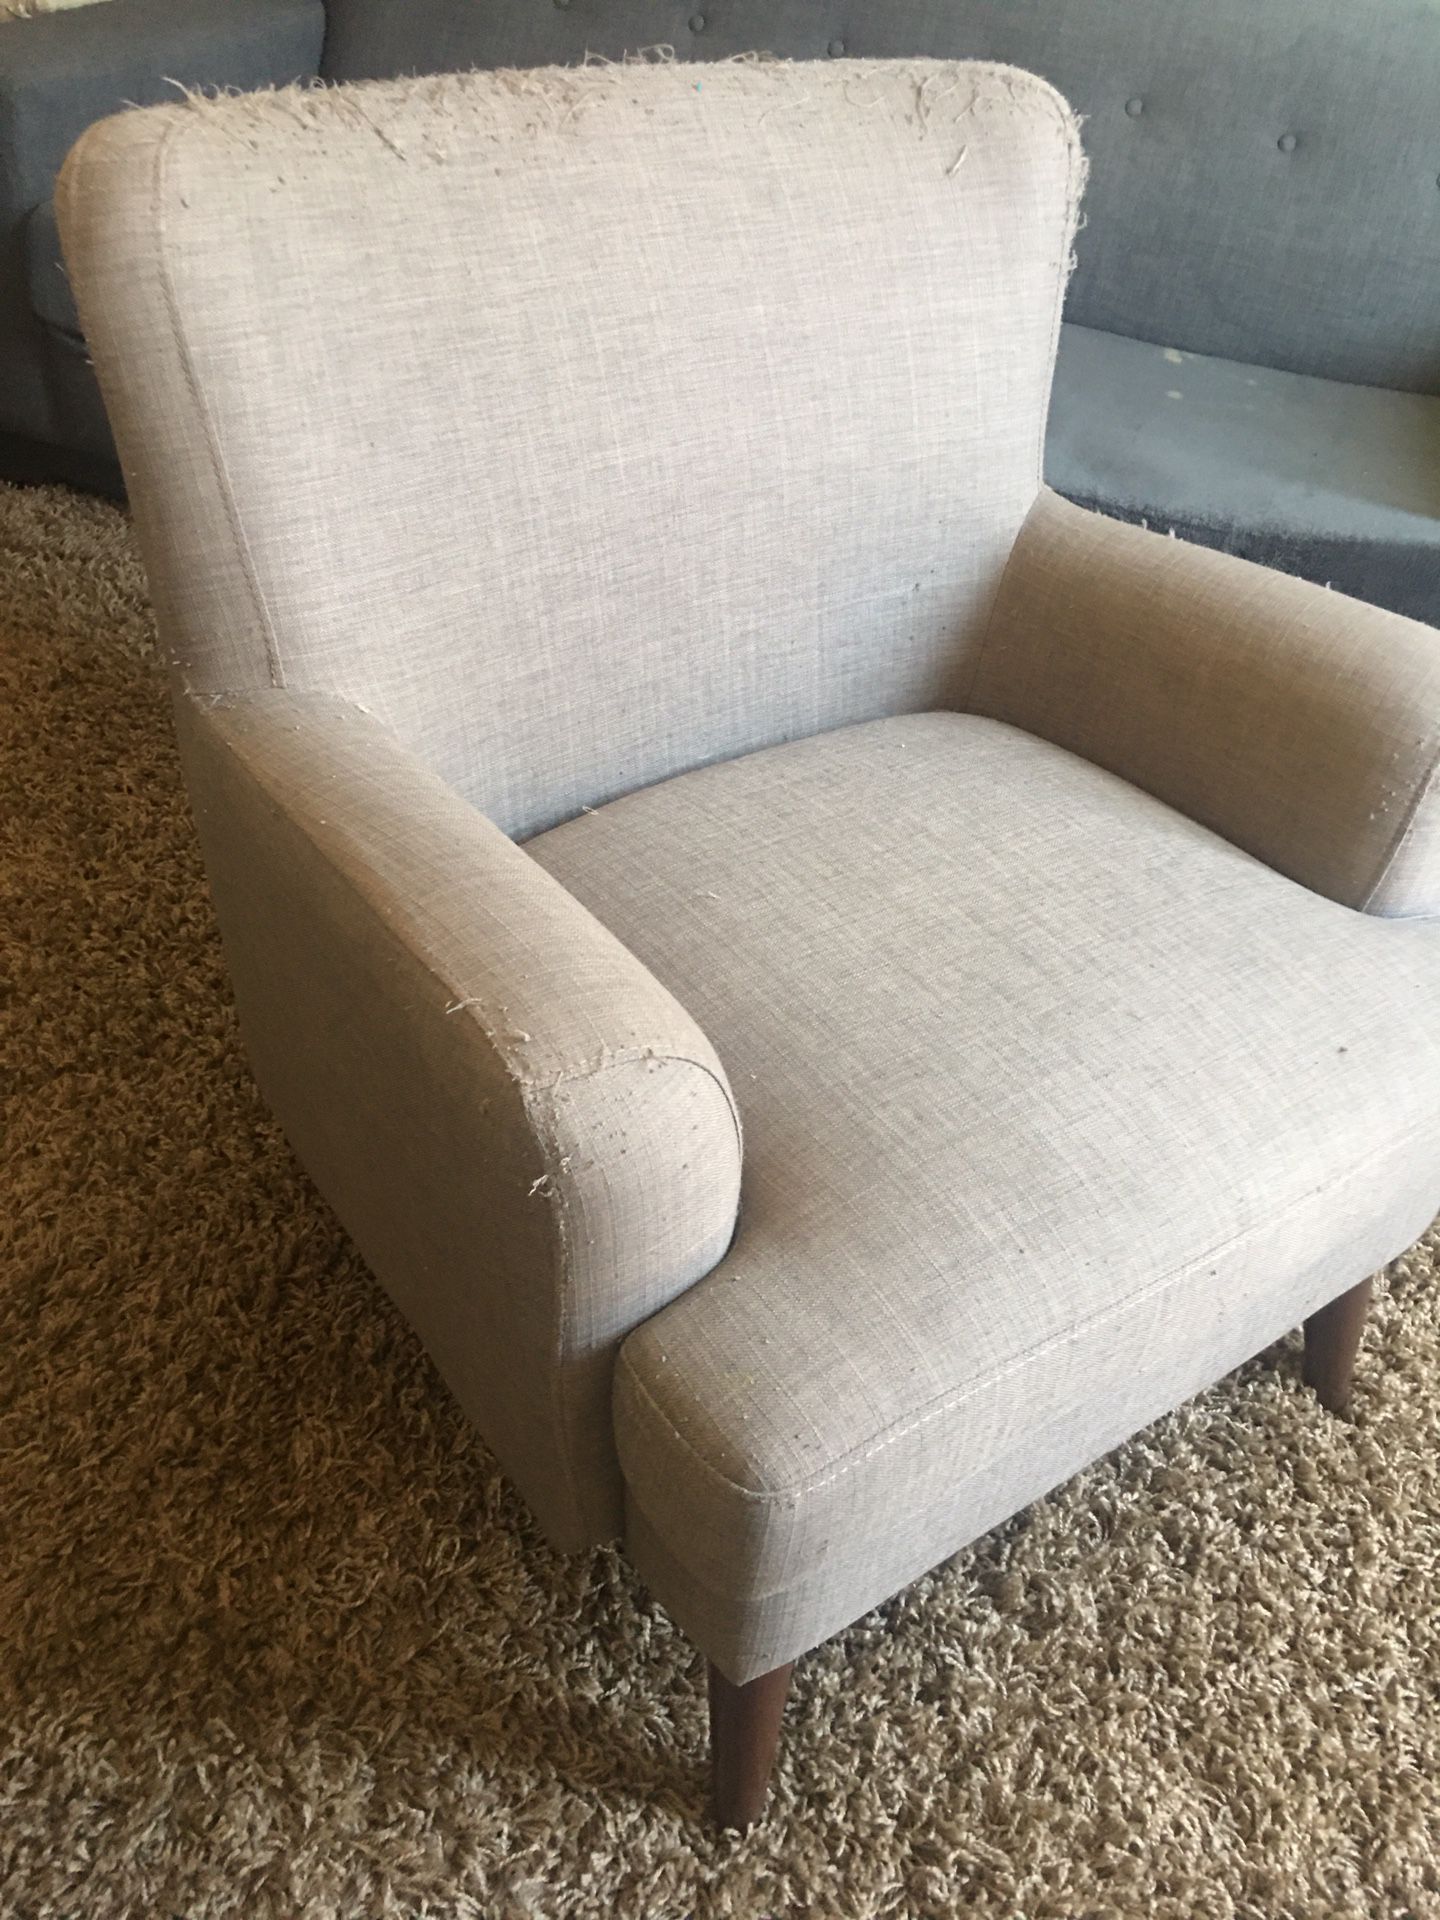 FREE Accent Chair-cat scratches but great bones